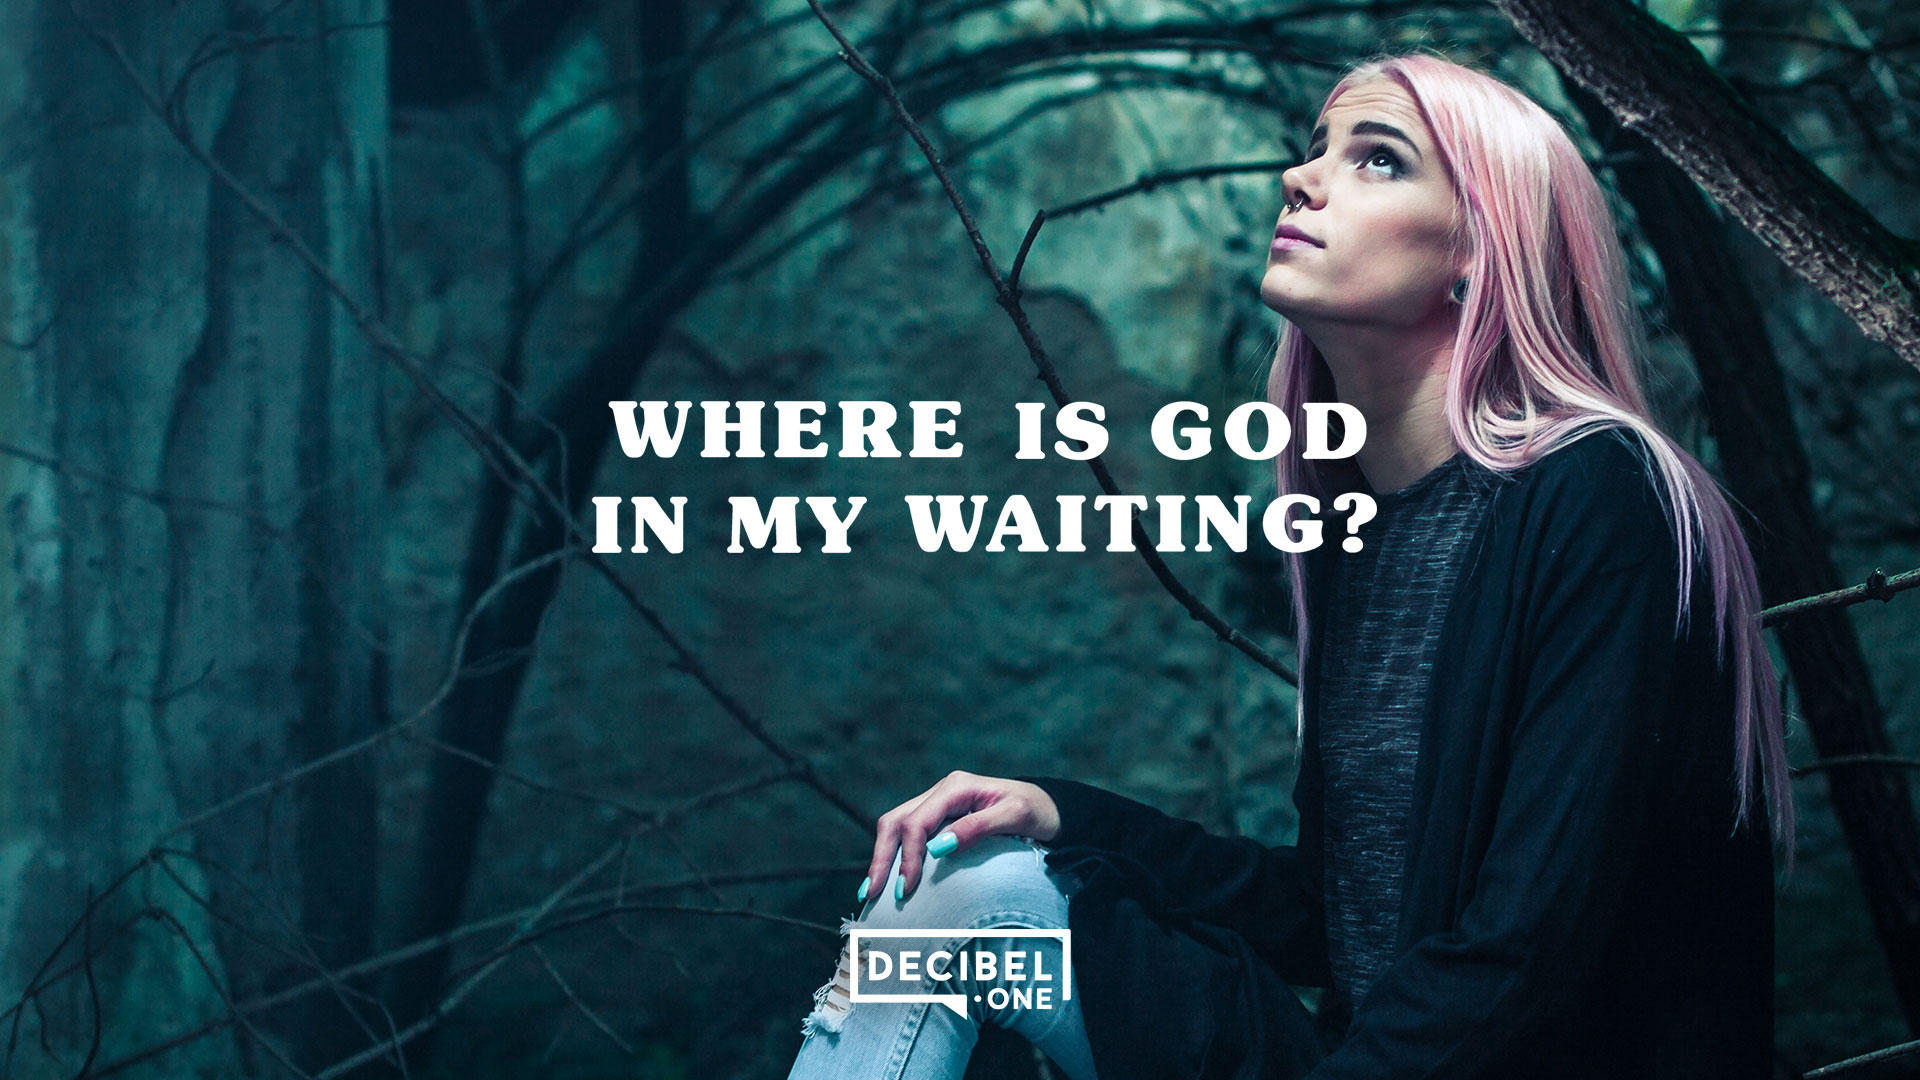 Where is God in my waiting?